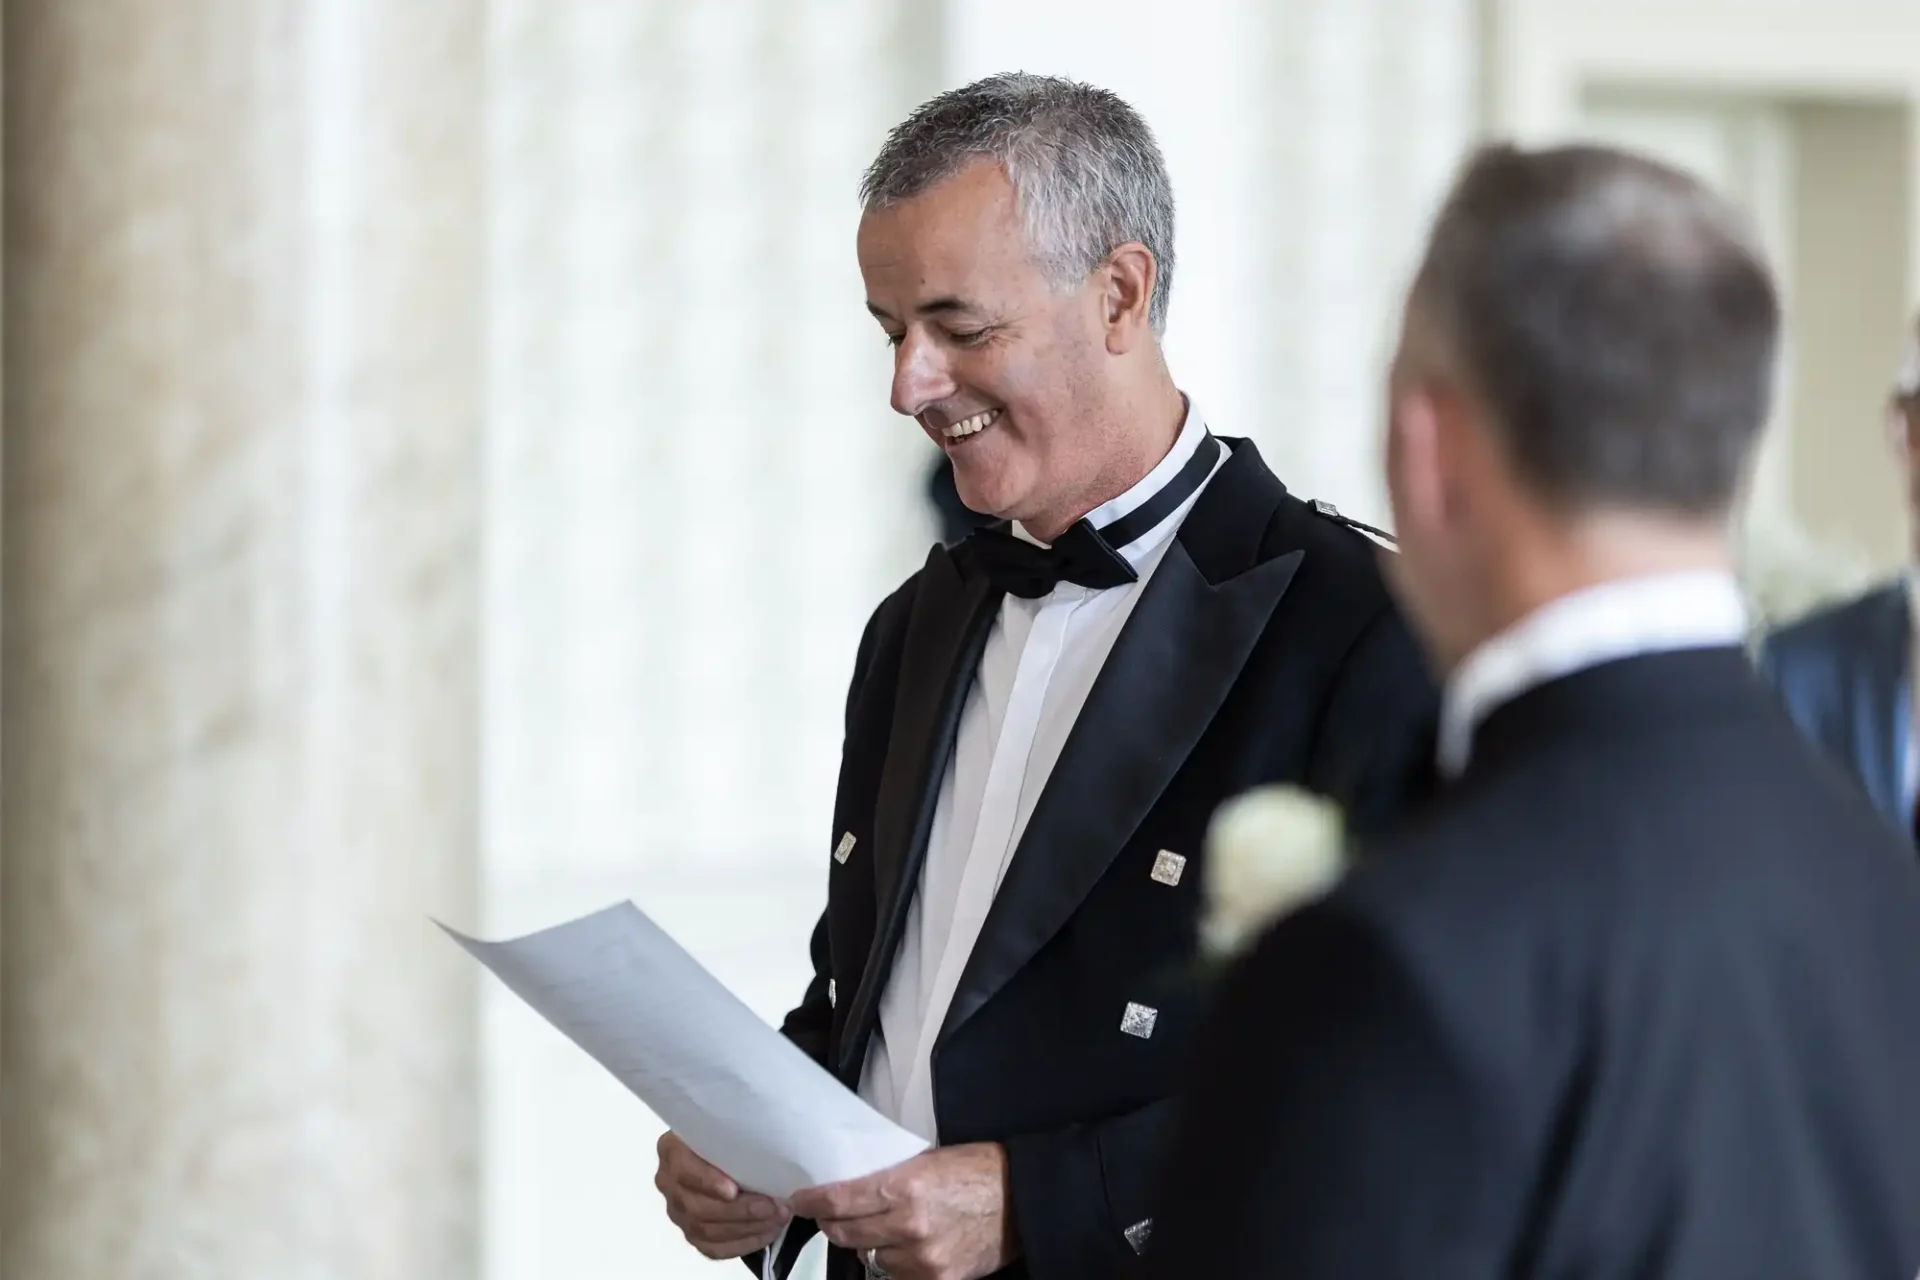 A smiling man in a tuxedo with a bow tie reading a document, standing next to another man in a similar outfit at an indoor event.